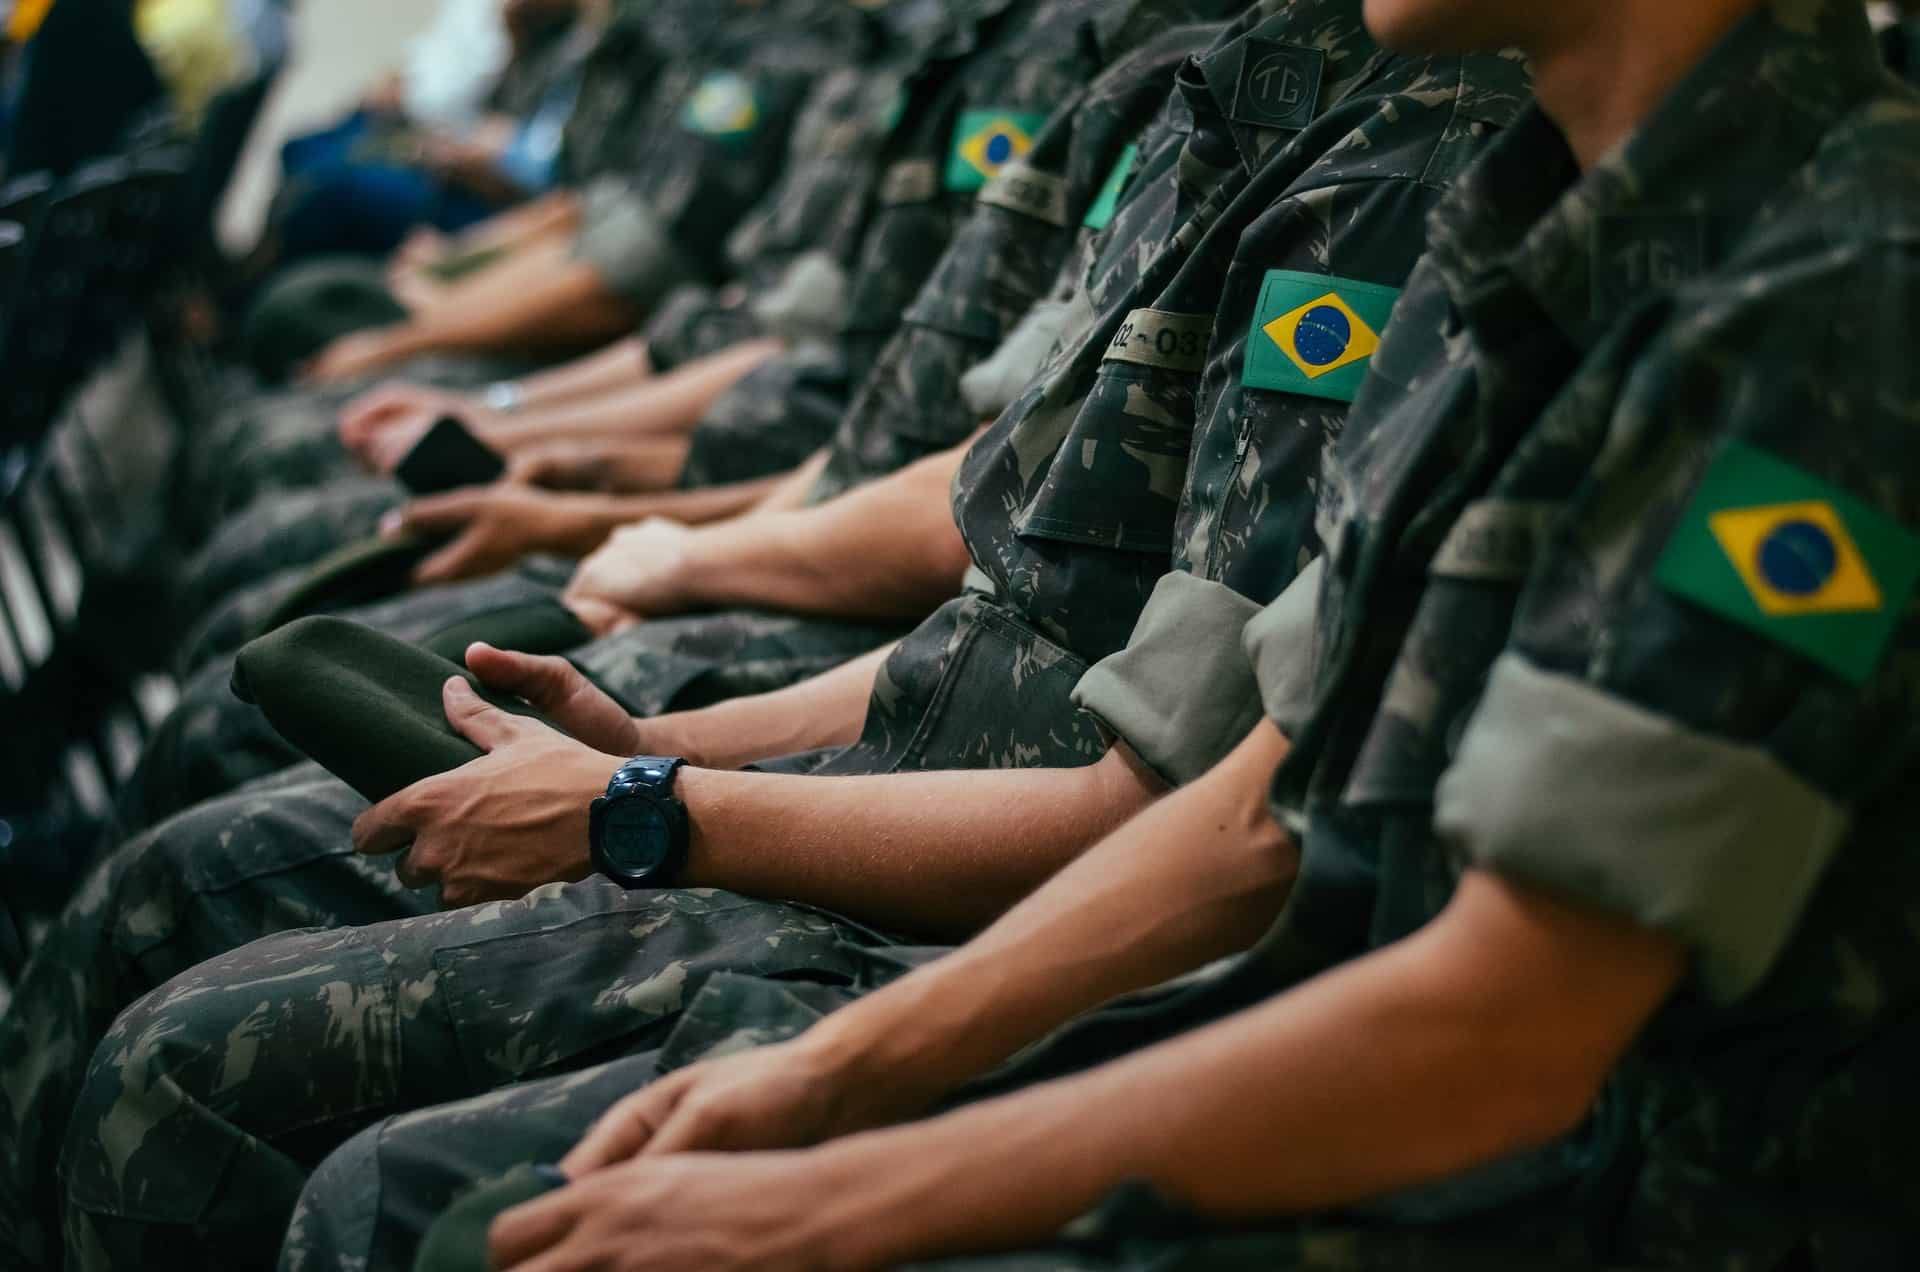 Army workers sit with the Brazilian flag on armbands of their camo uniforms.